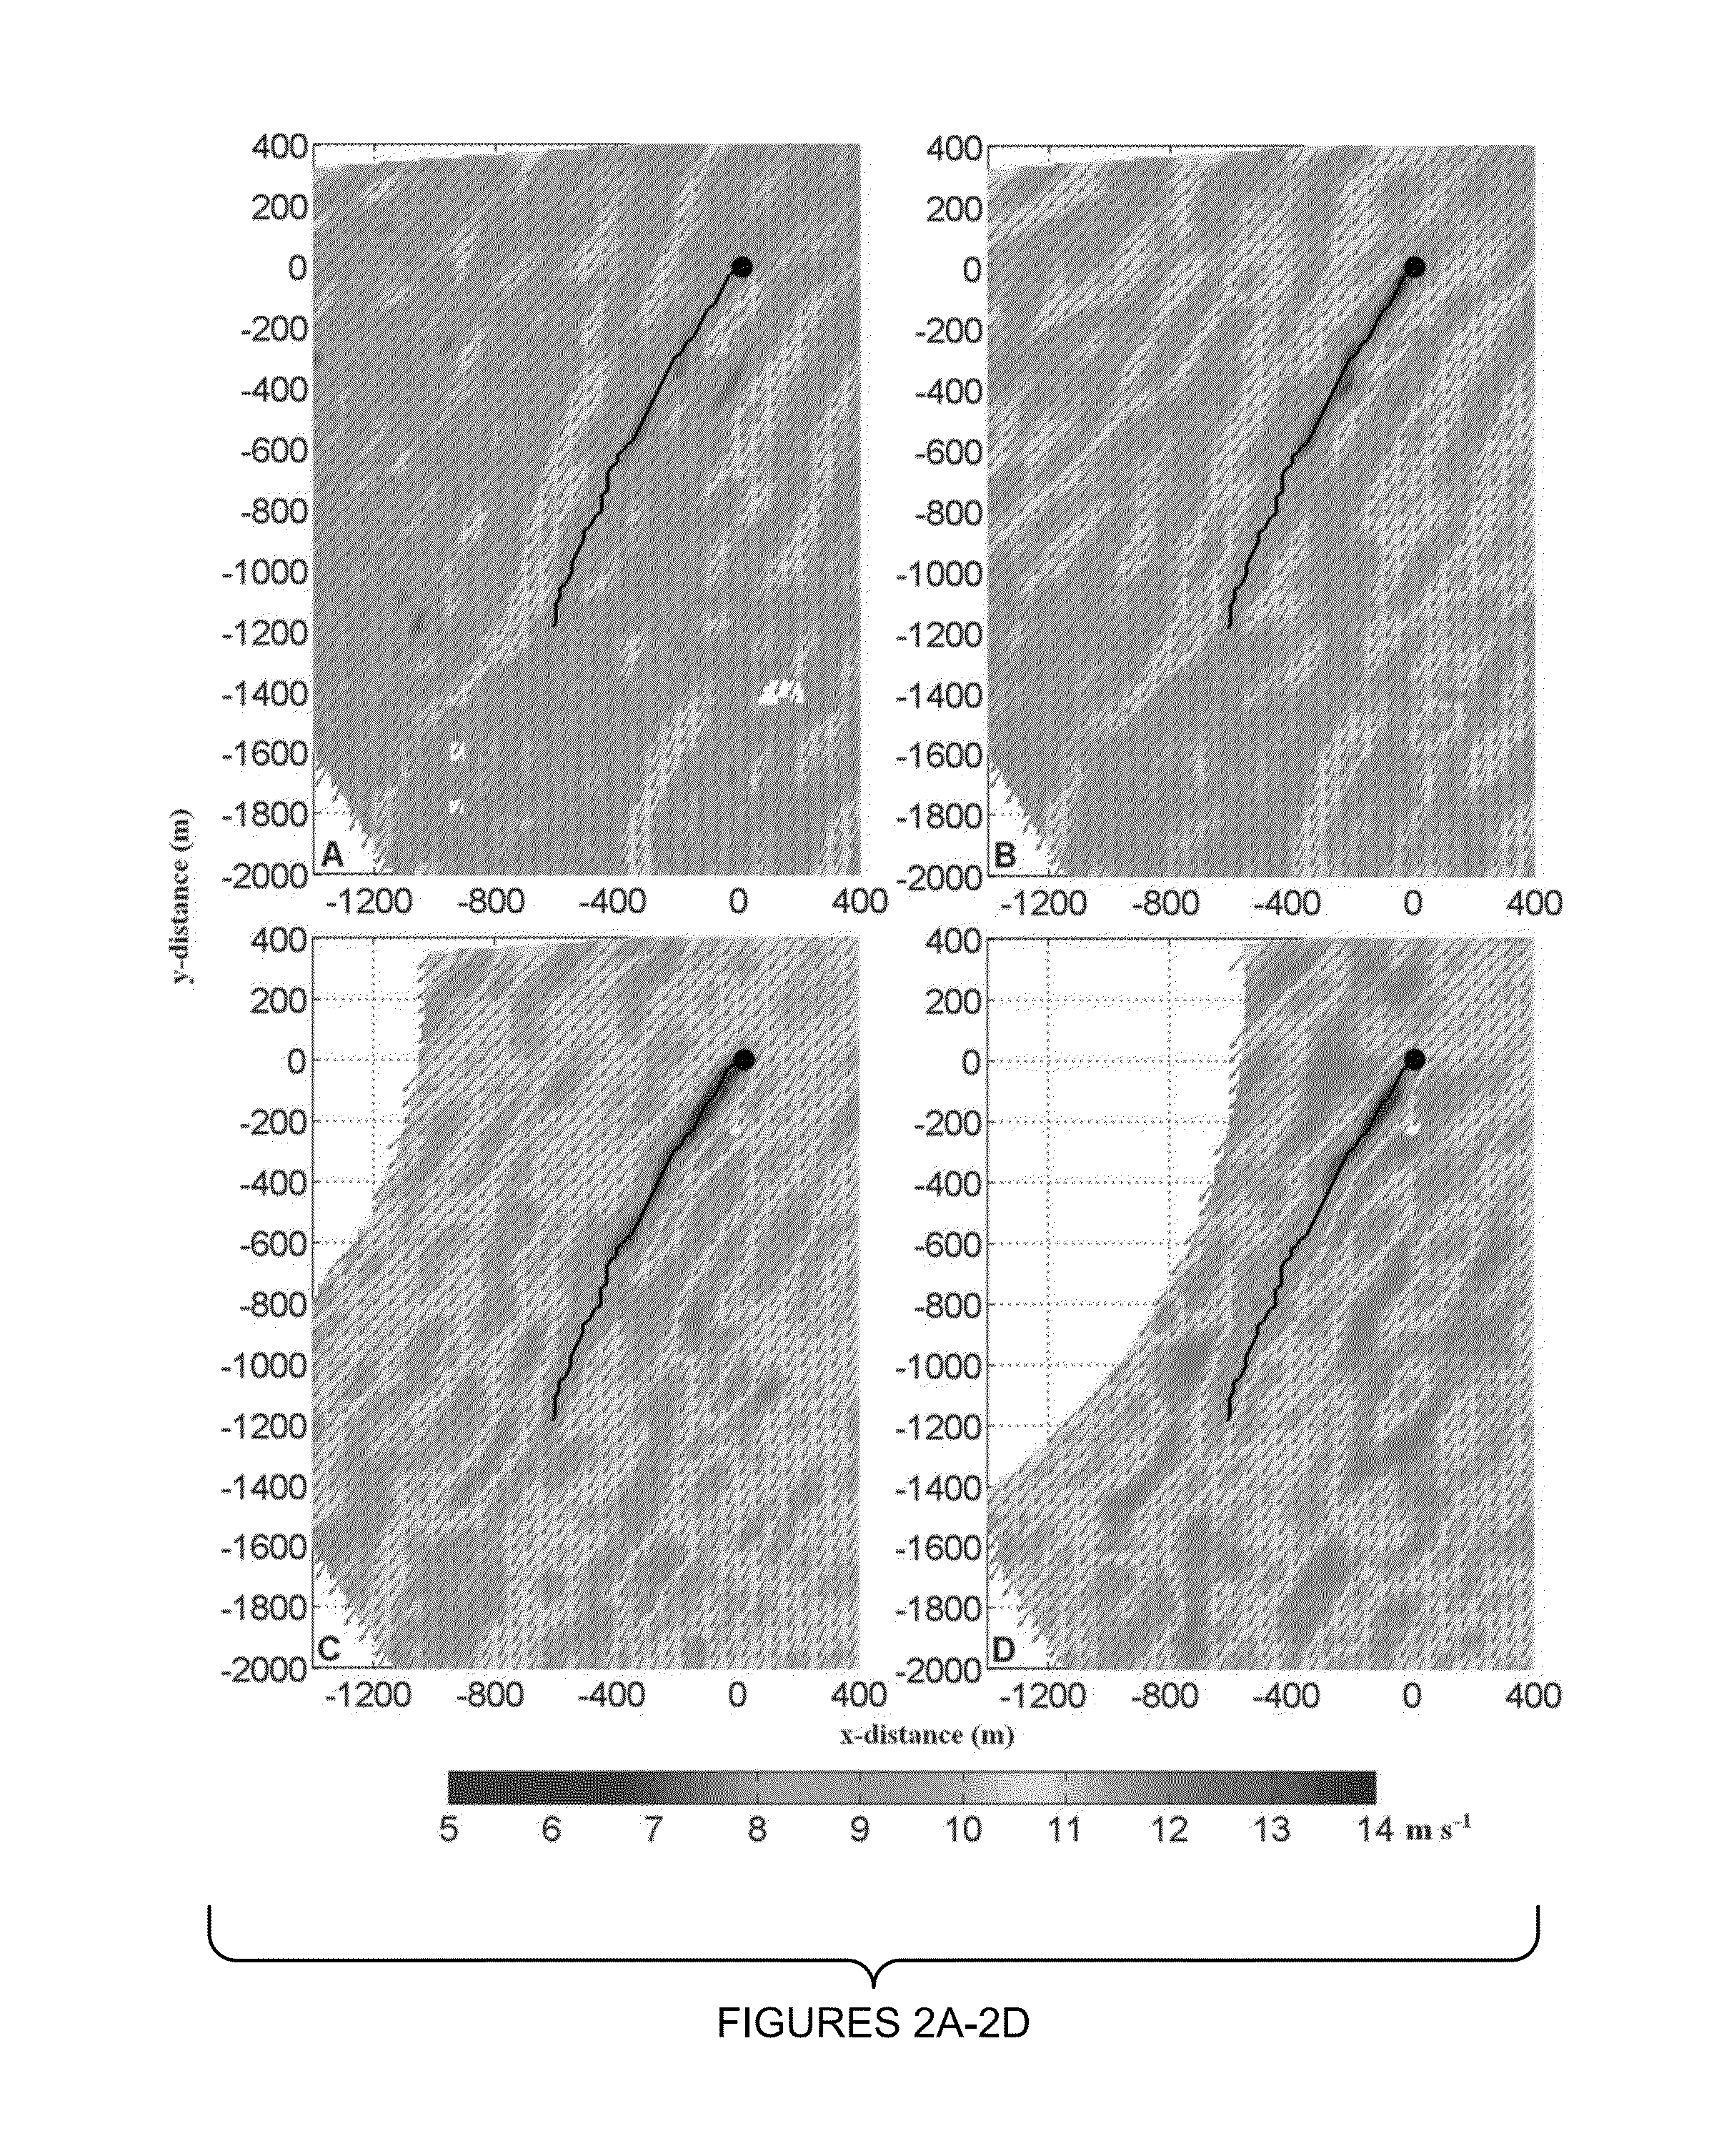 System and Method for Evaluating Wind Flow Fields Using Remote Sensing Devices